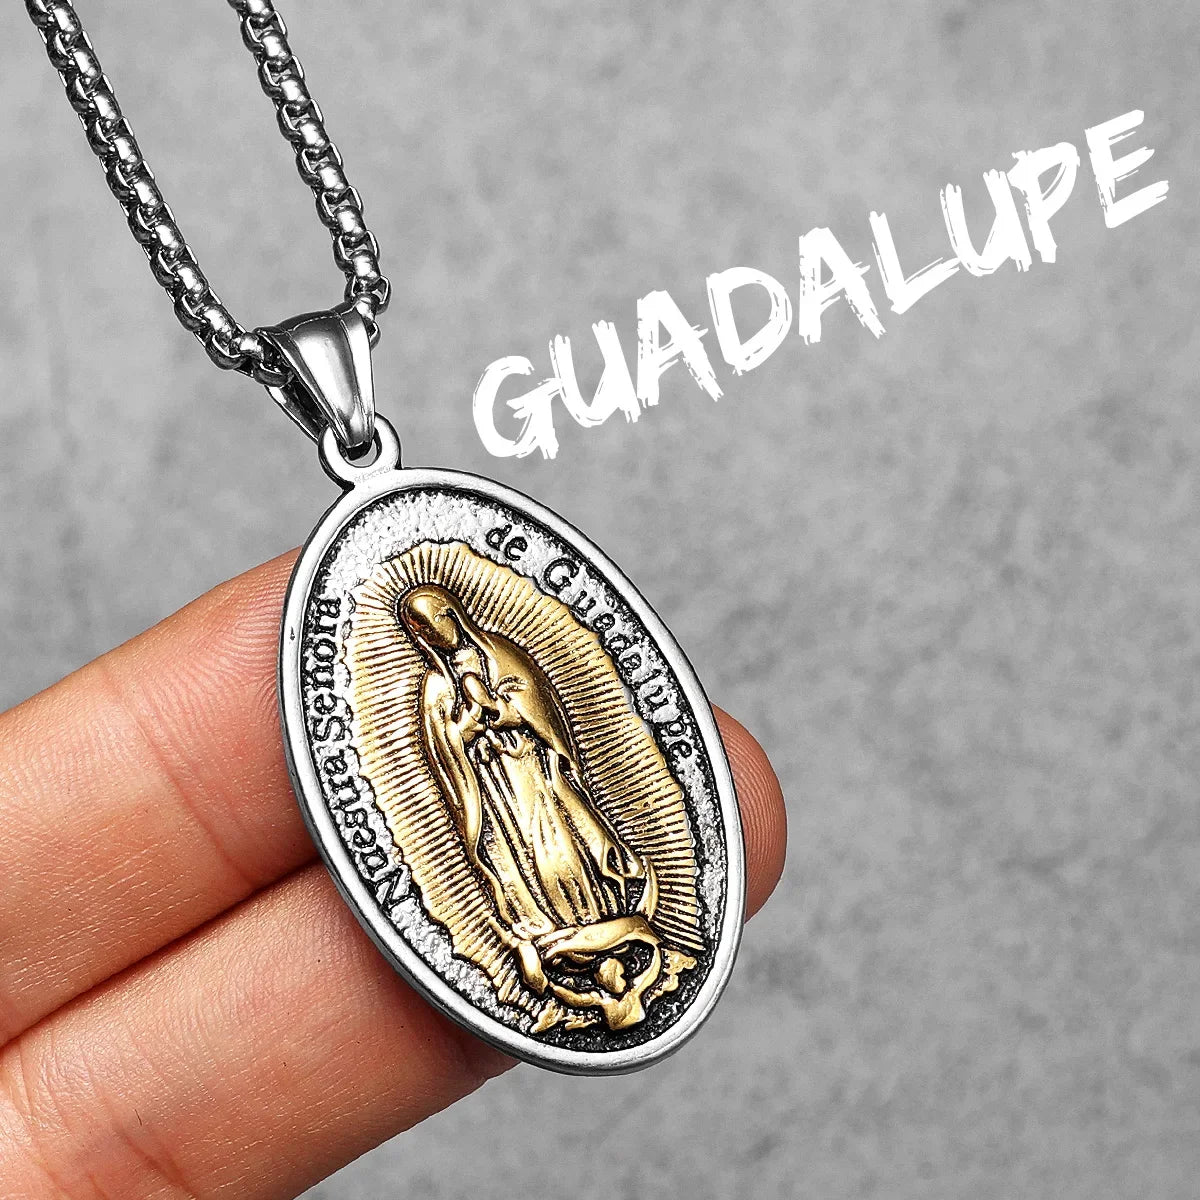 Virgin Mary Guadalupe Angel Cross Stainless Steel Men Necklaces Pendant Chain Amulet For Women Fashion Jewelry Gifts Guadeloupe-E-G